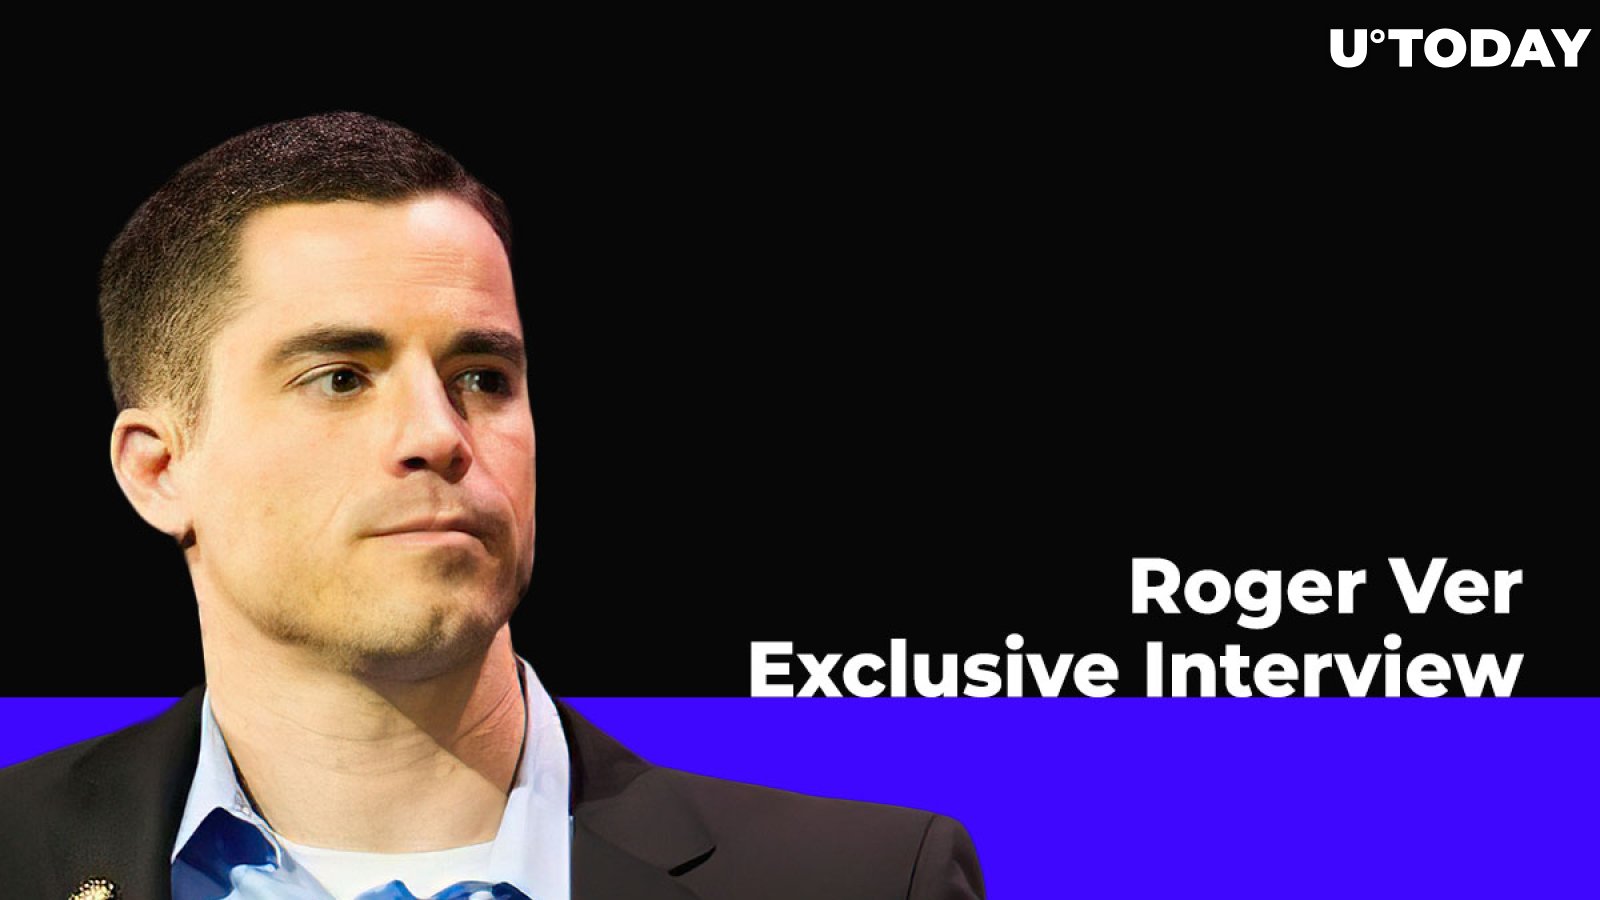 Exclusive Interview with Roger Ver: Should We Expect Something Similar to 2017’s Crypto Boom Again?